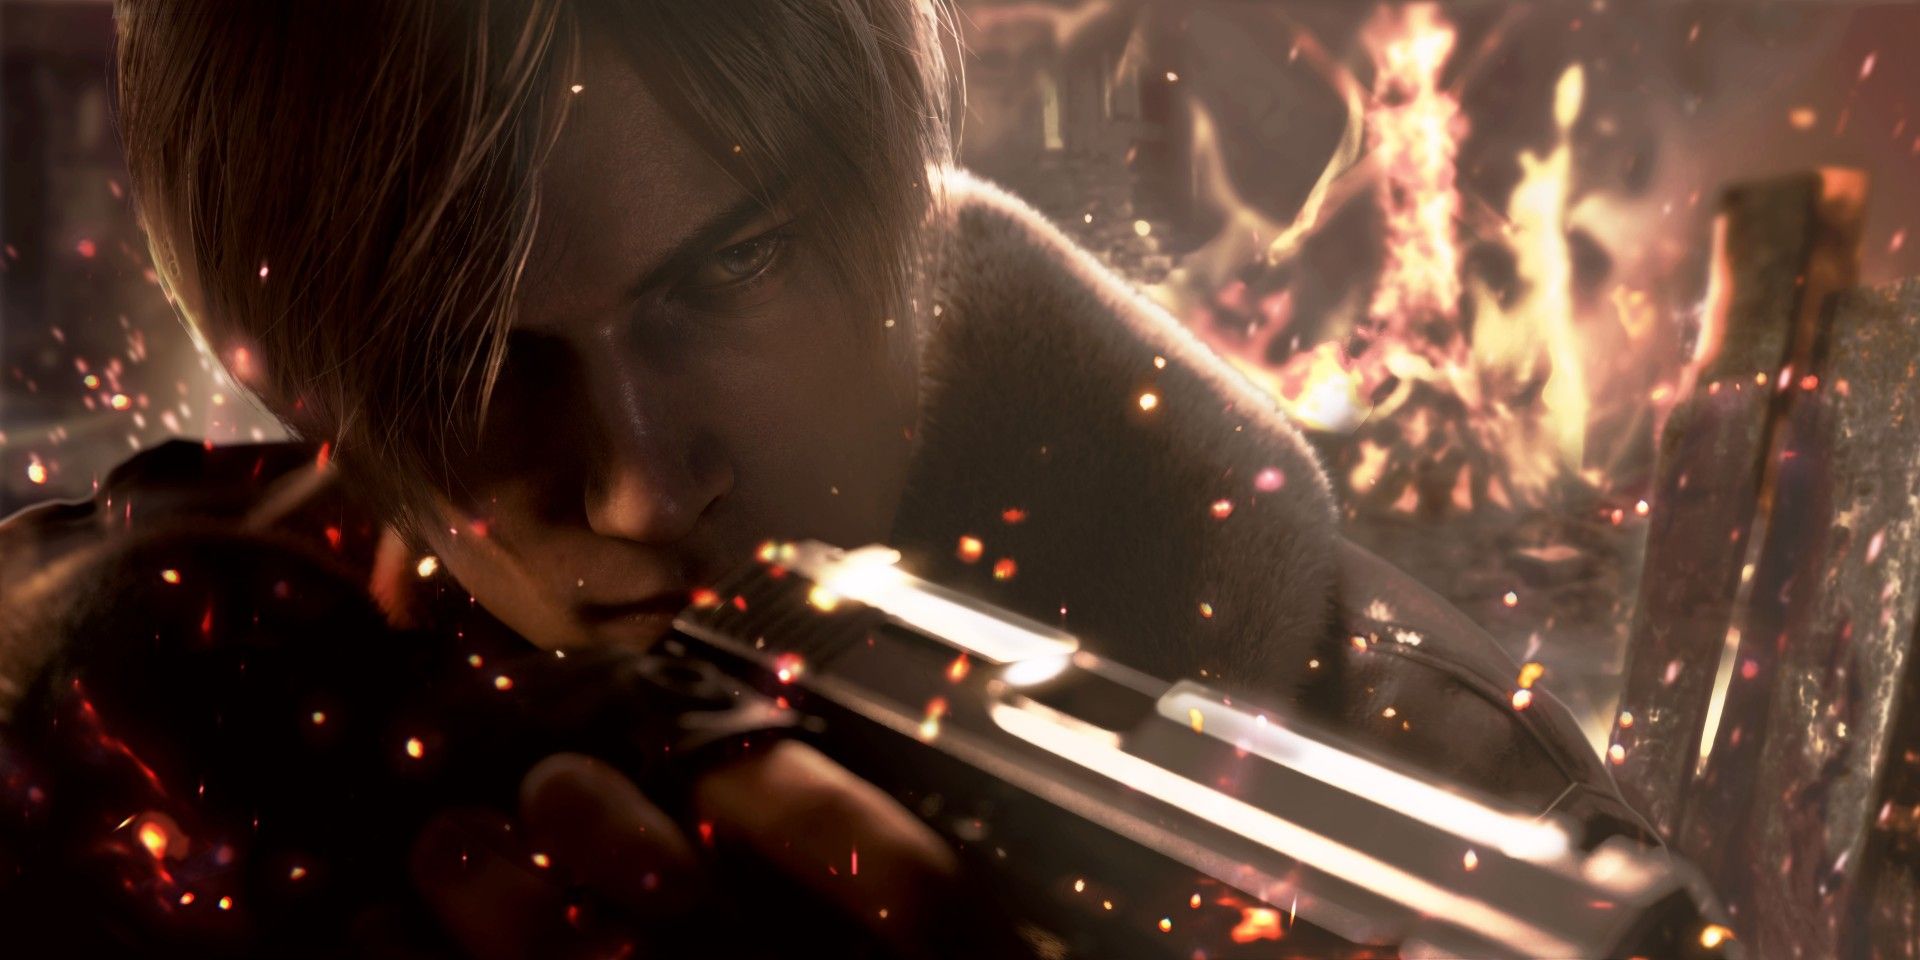 Leon aiming a pistol in Resident Evil 4 Remake while fire burns behind him. 